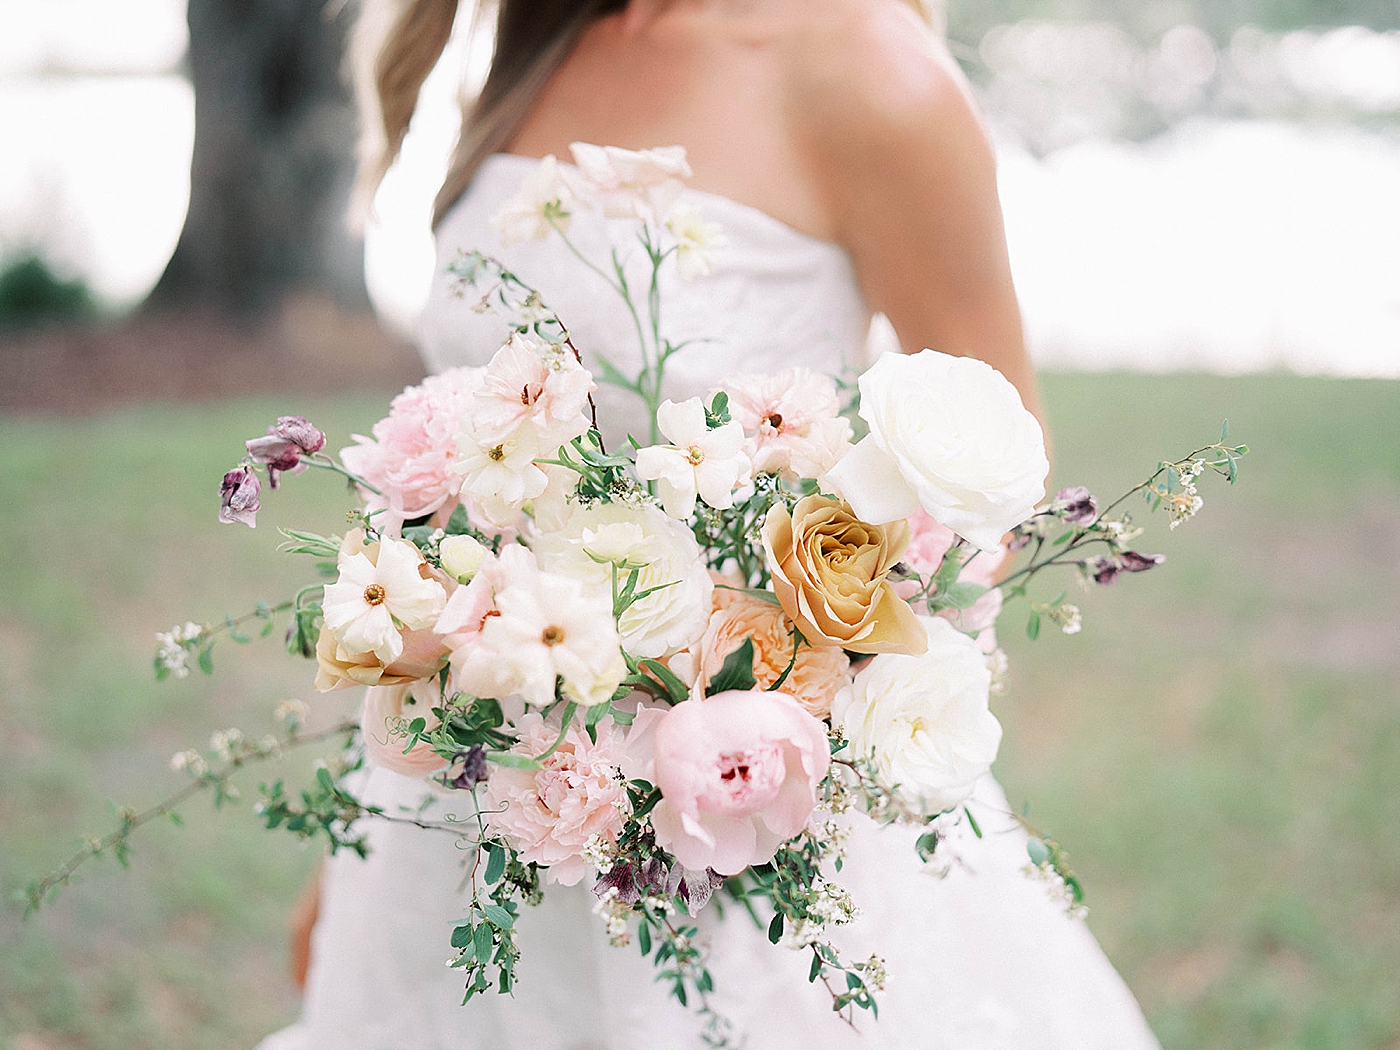 Details of bridal bouquet held by bride | Carters Event Co